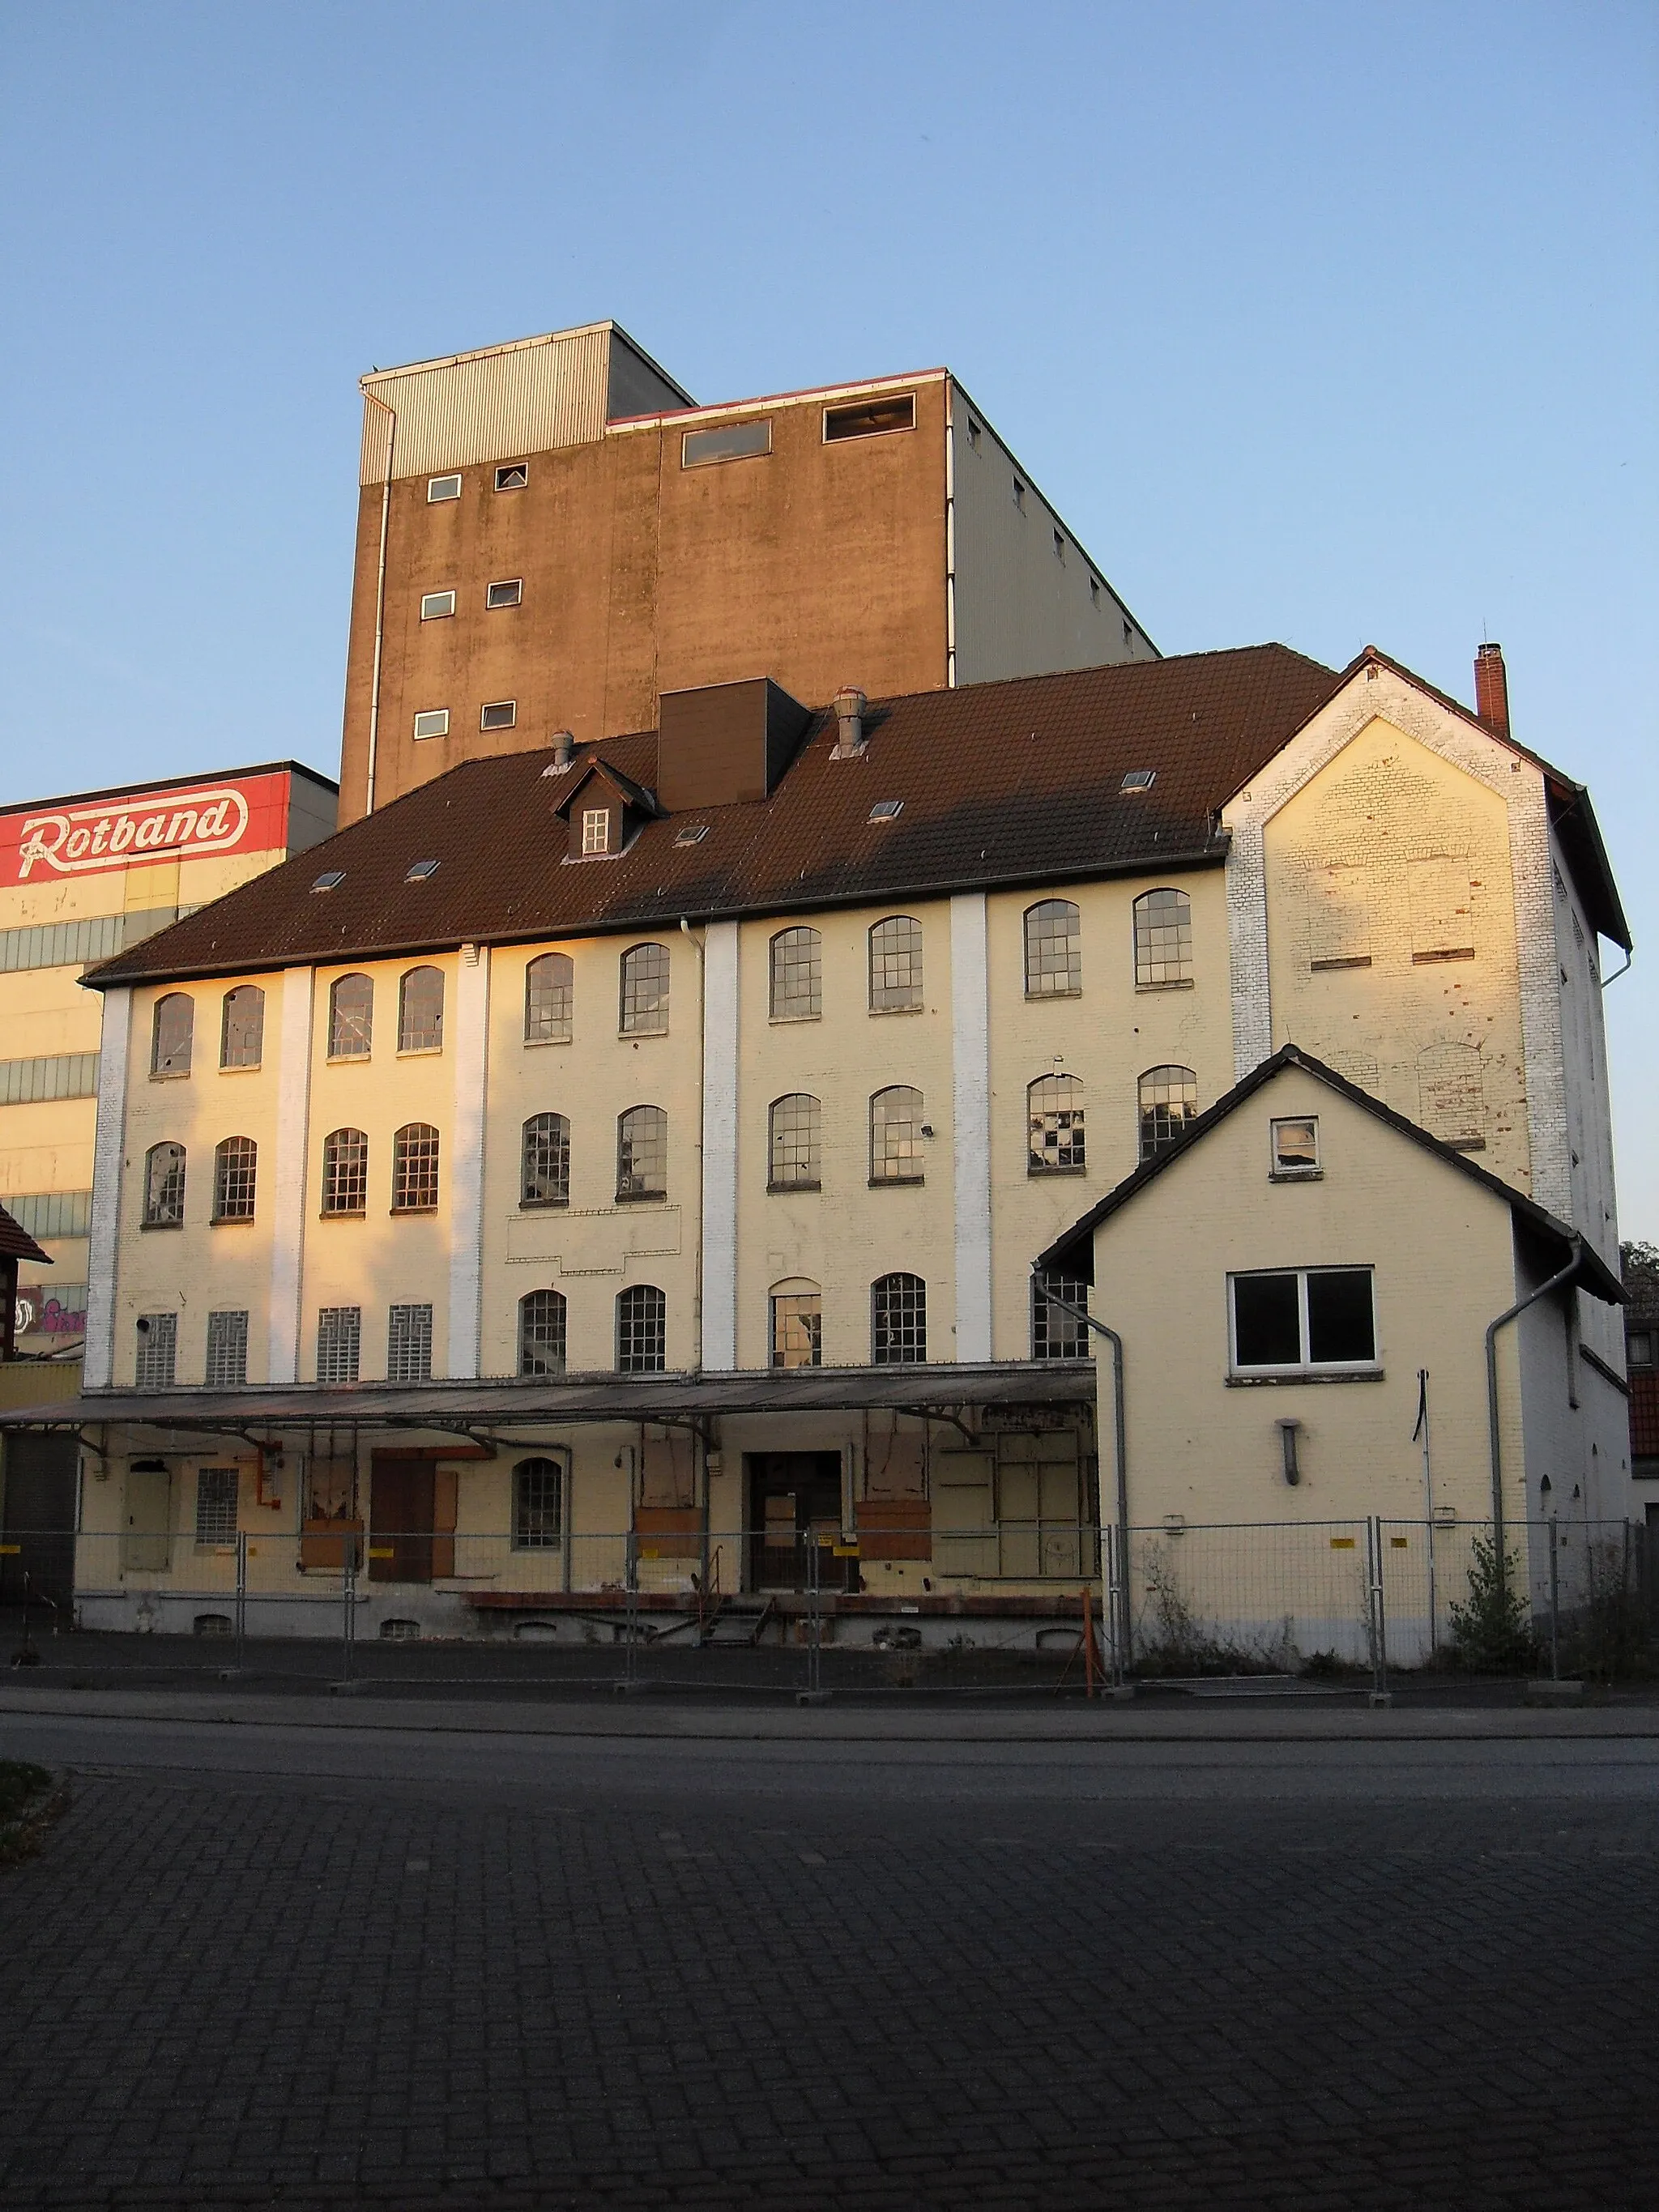 Photo showing: The abandoned flour mill in Sickte, Lower Saxony, Germany